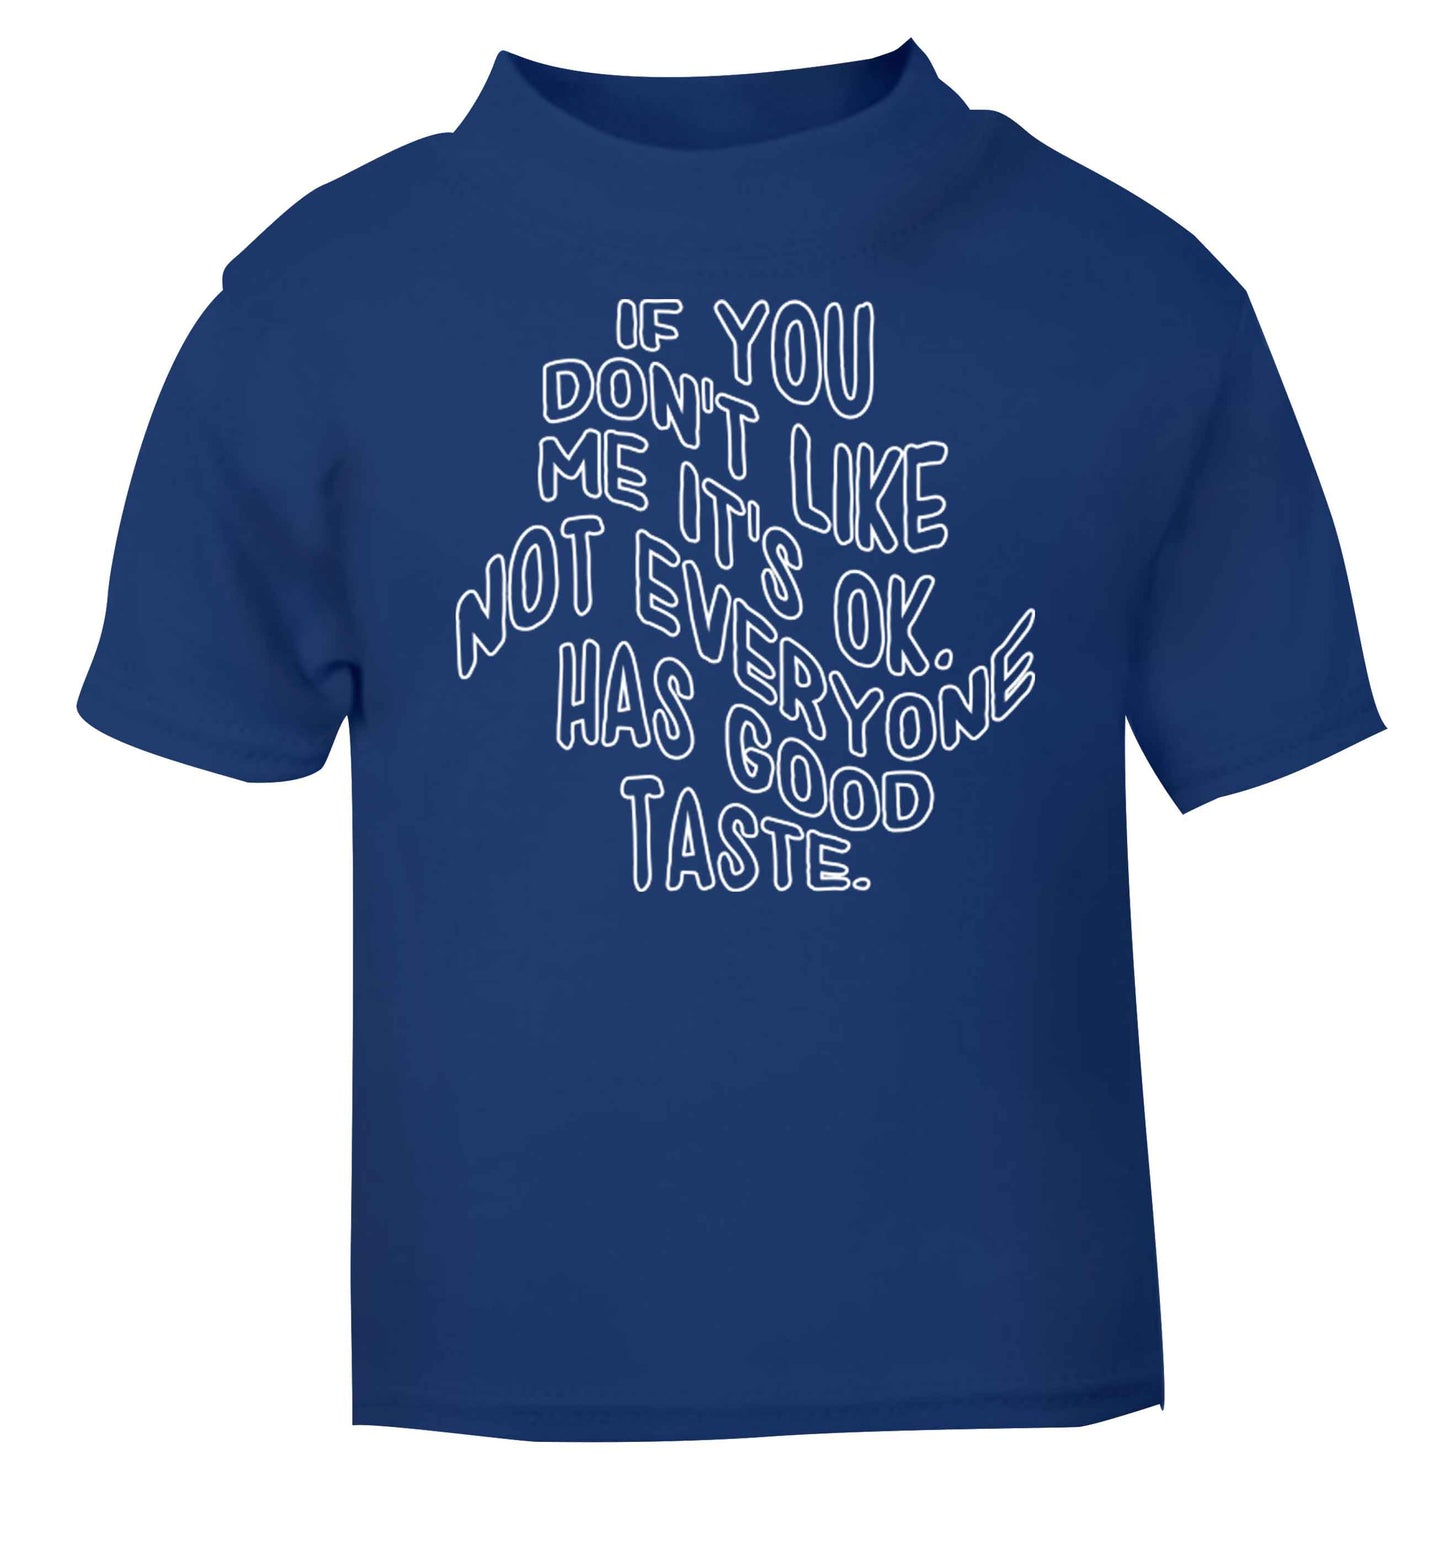 If you don't like me it's ok not everyone has good taste blue baby toddler Tshirt 2 Years